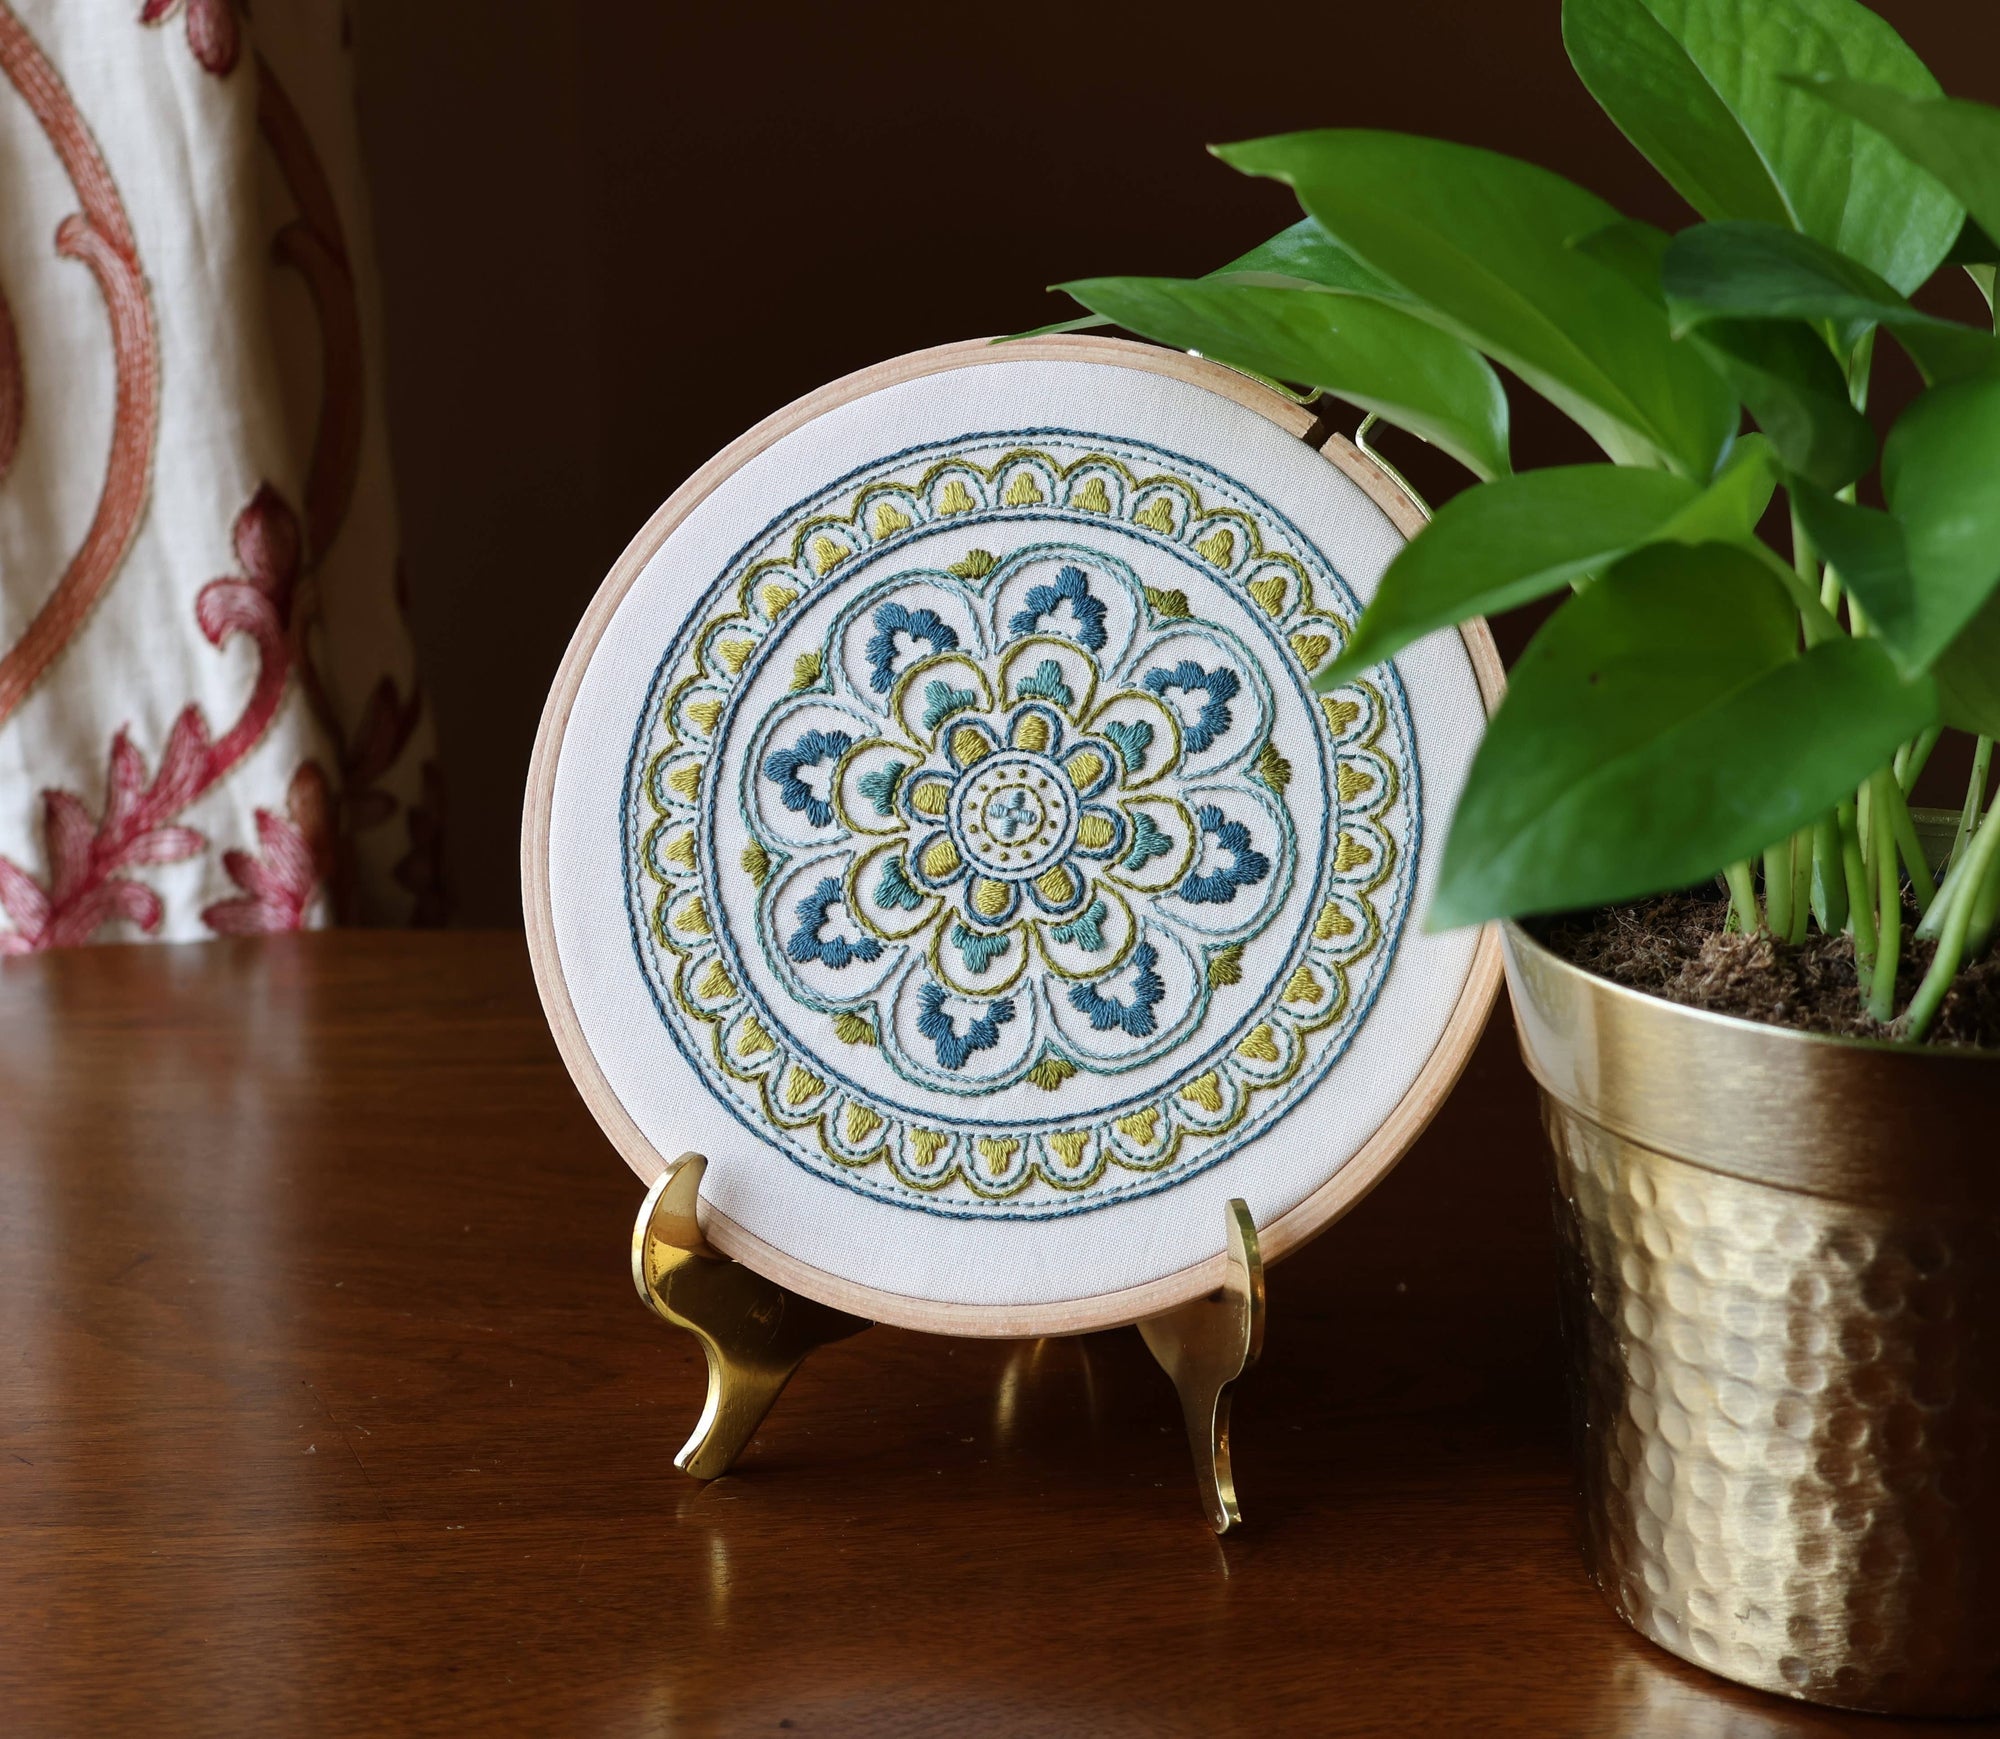 Avlea Folk Embroidery  Cross Stitch kits inspired by traditional